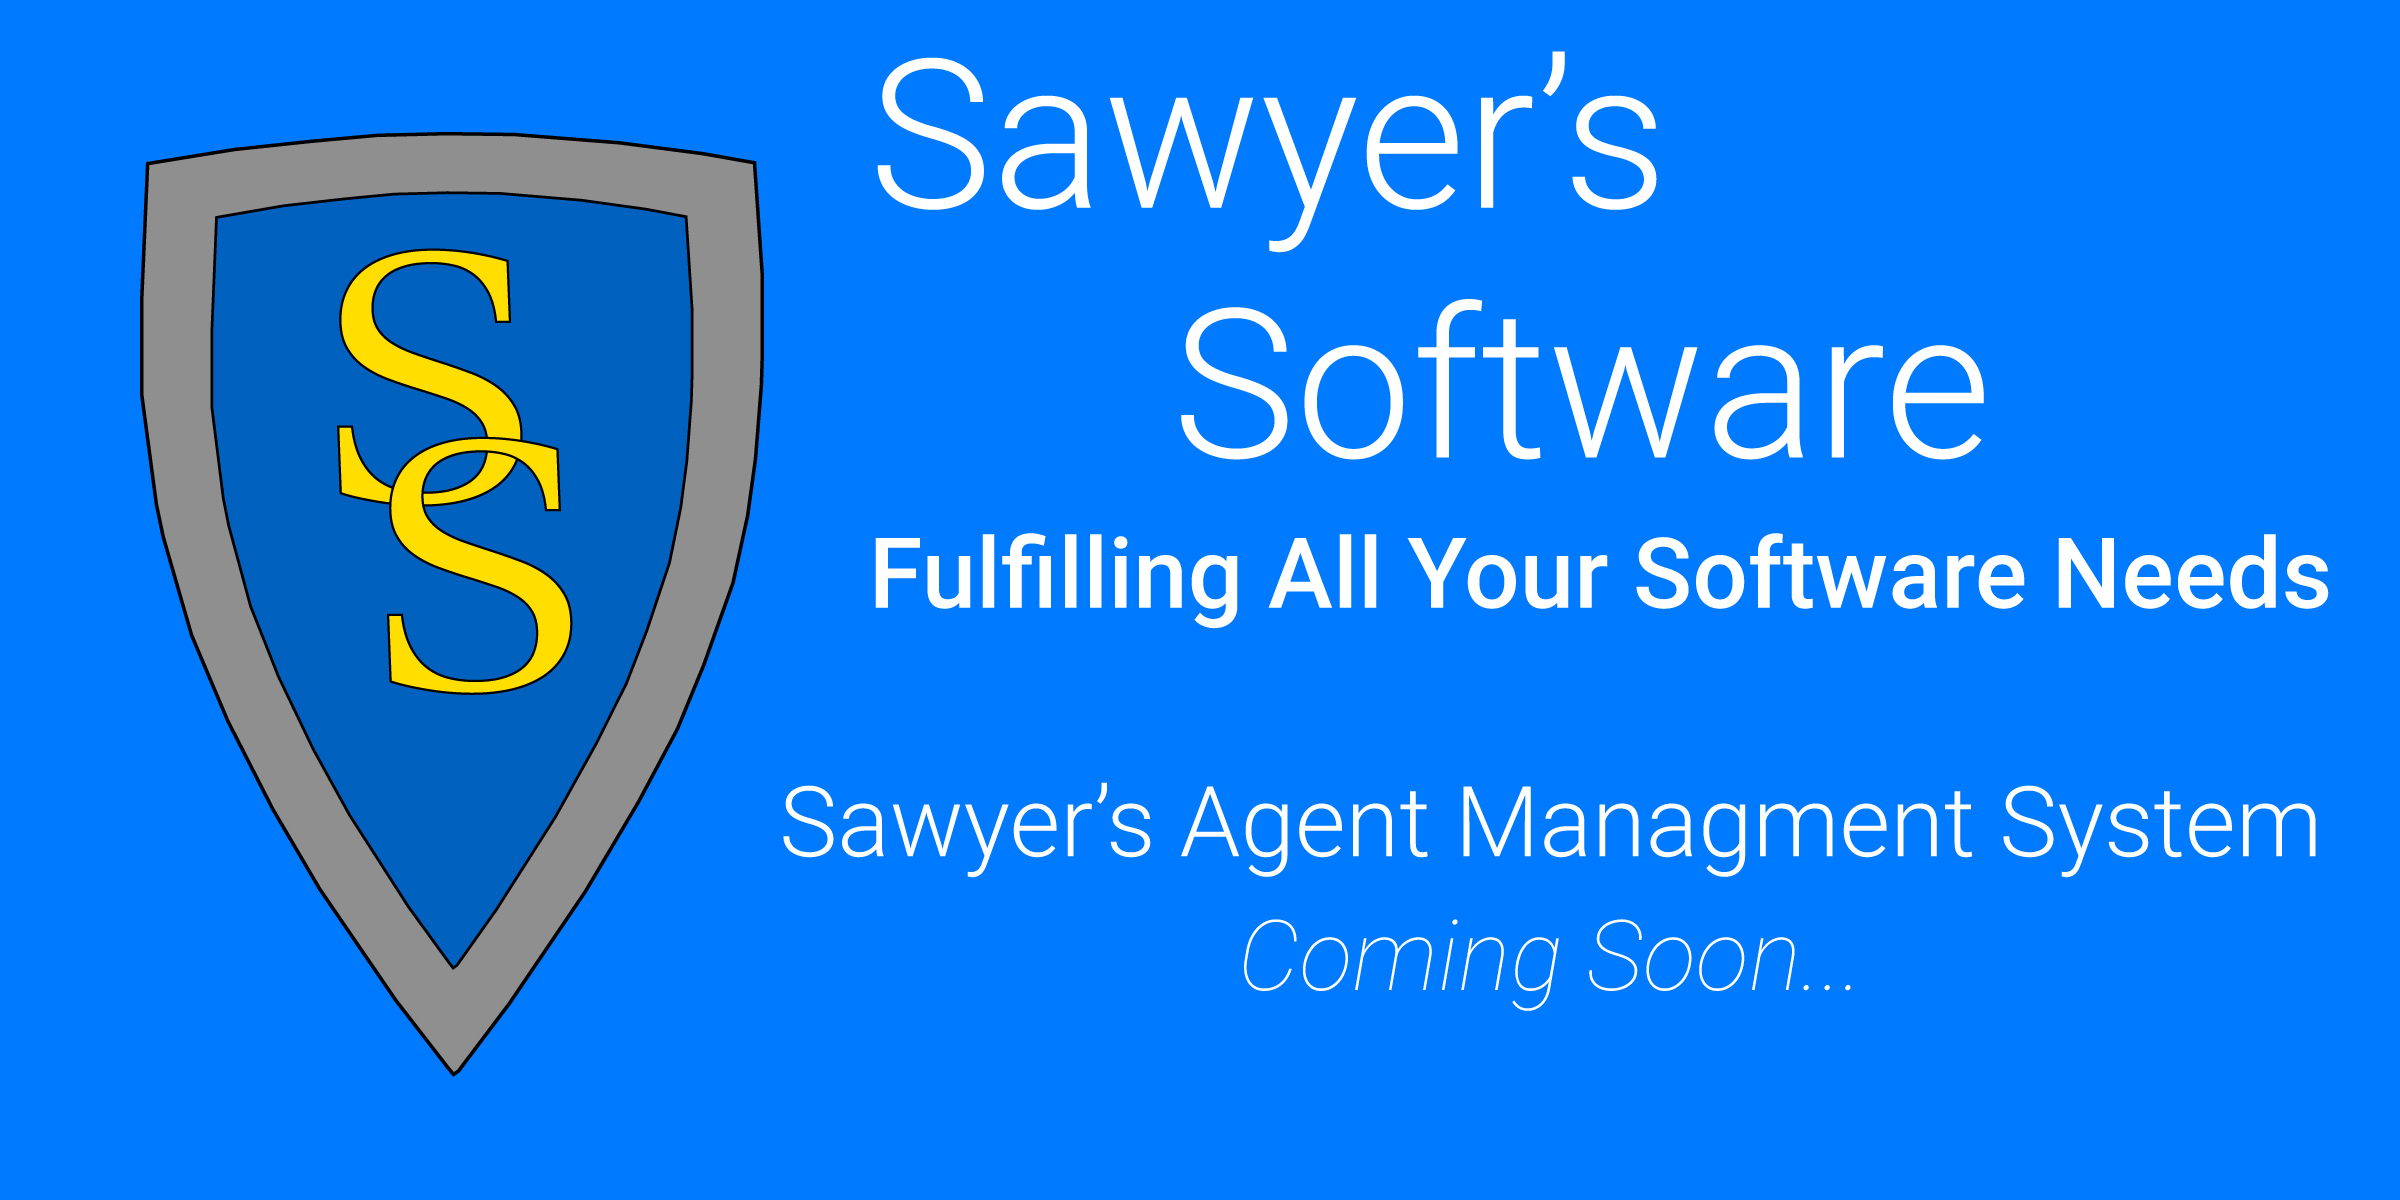 Coming Soon : Sawyer’s Agent Management System